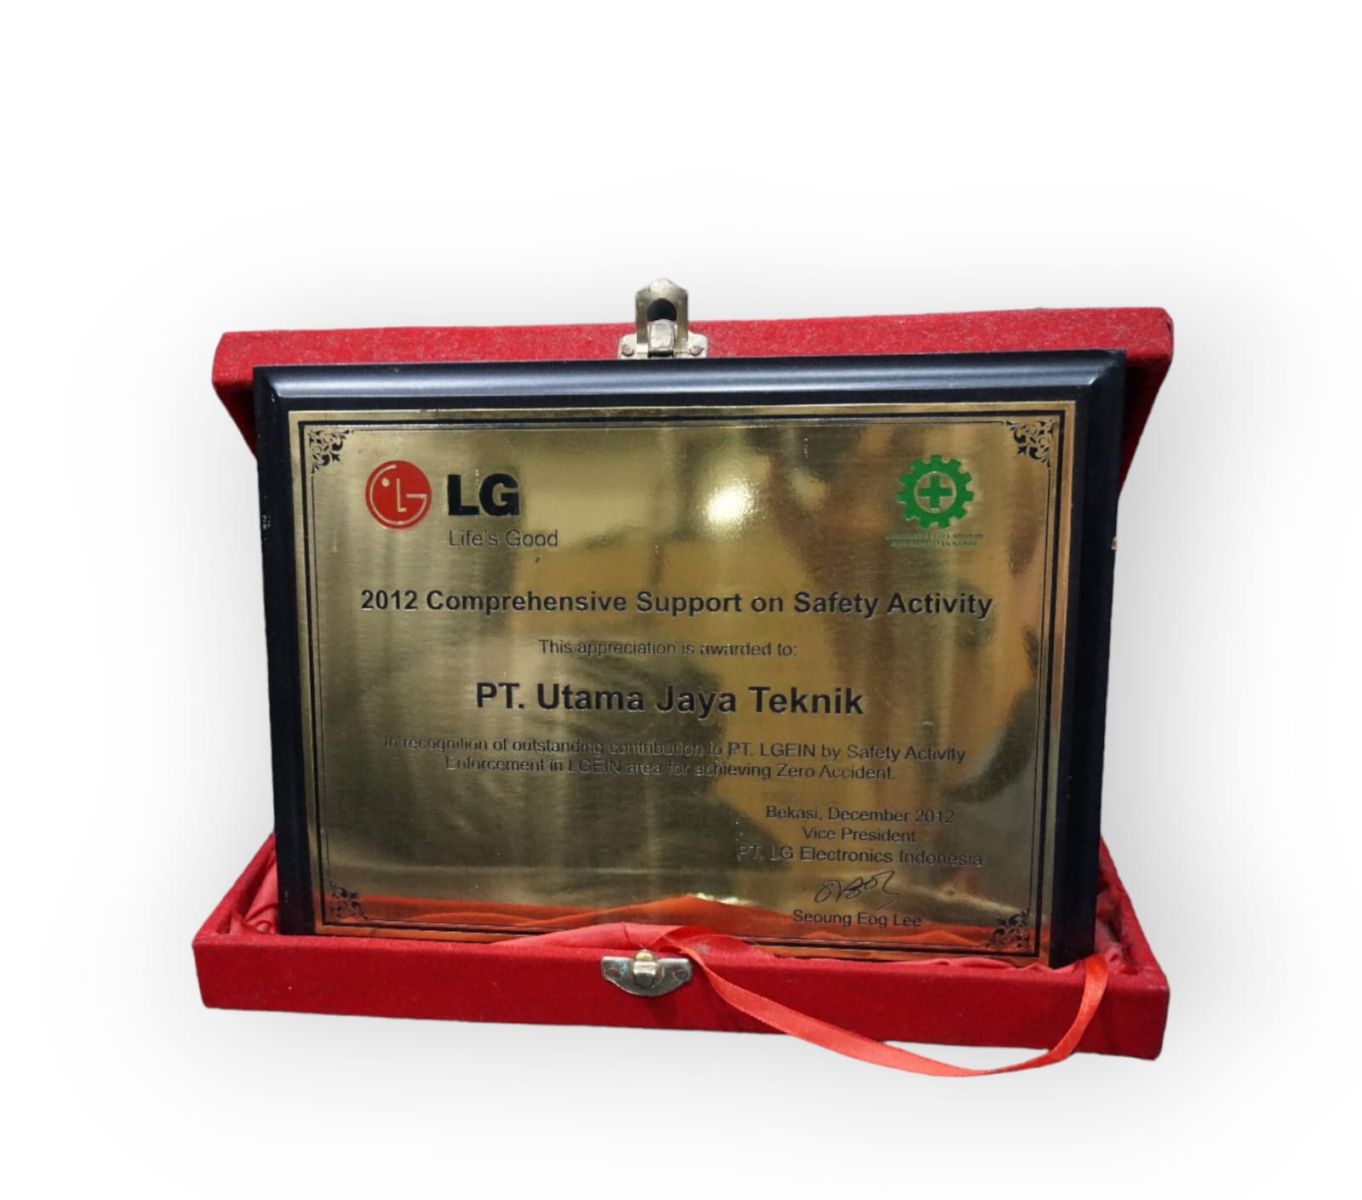 AWARDS FROM PT. LG ELECTRONICS INDONESIA (II)